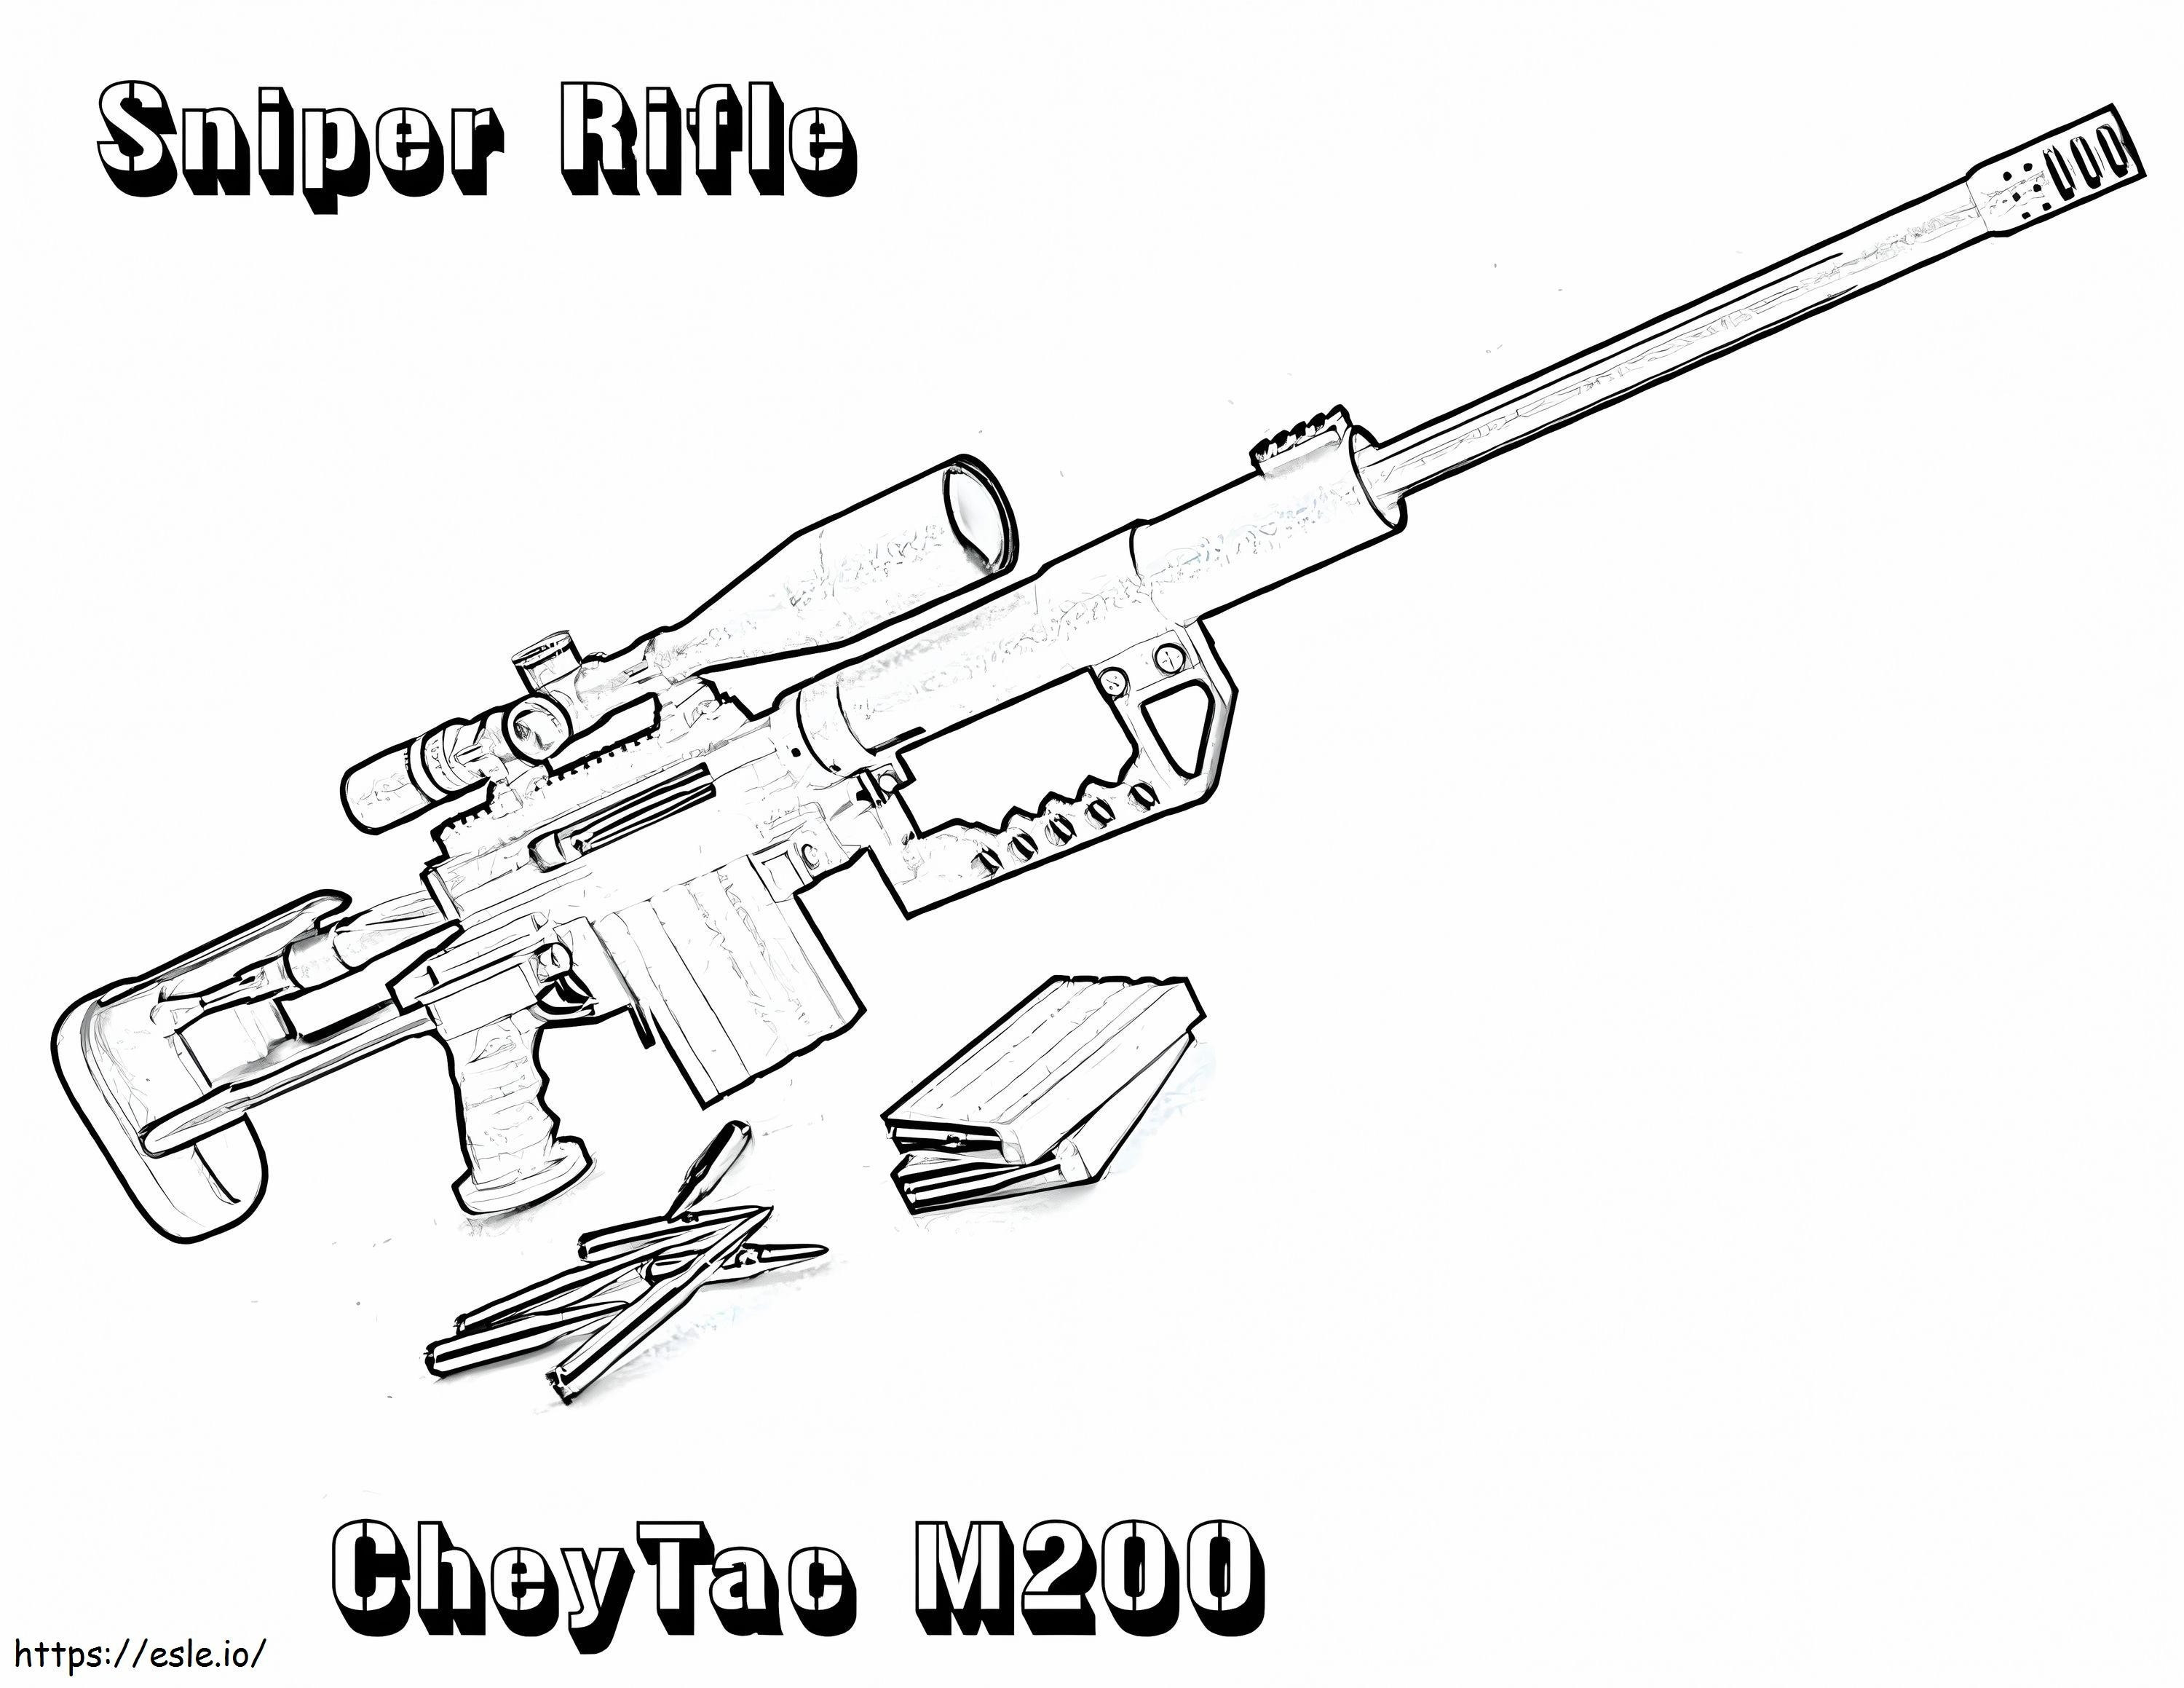 Shooting Machine coloring page